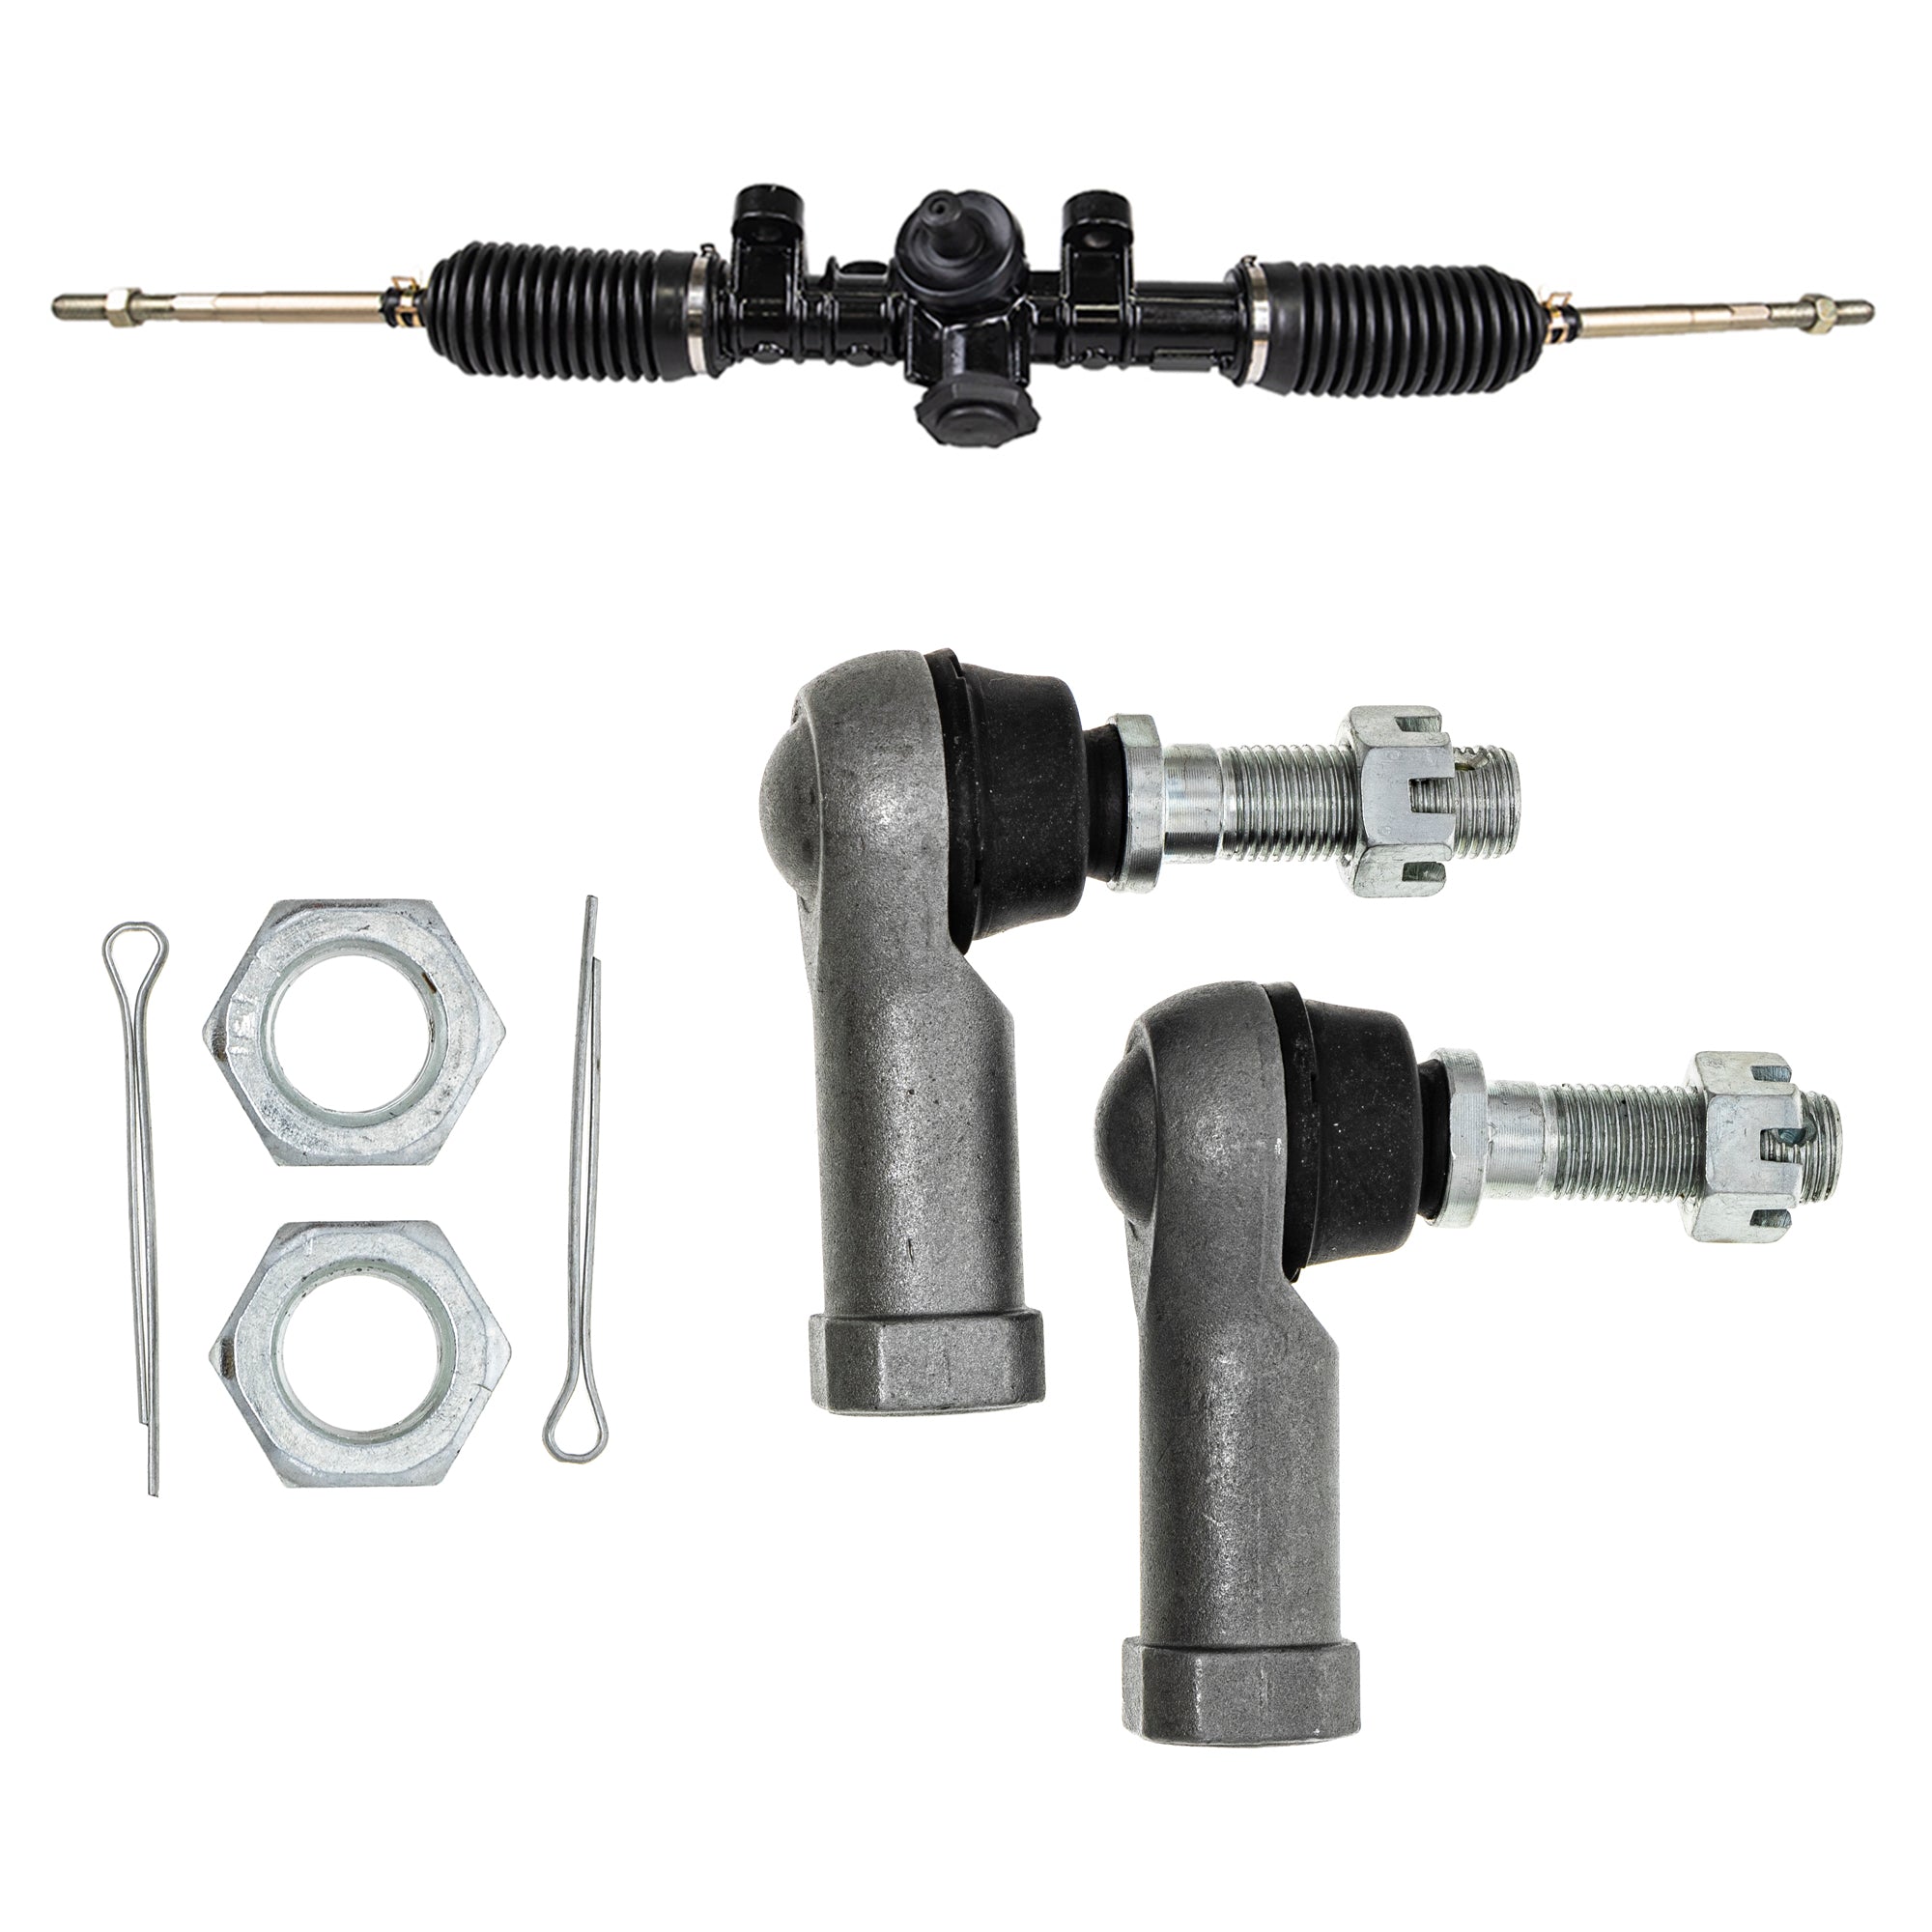 Steering Rack Assembly & Tie Rods Kit for zOTHER Yamaha Wolverine Viking Rhino NICHE MK1006182